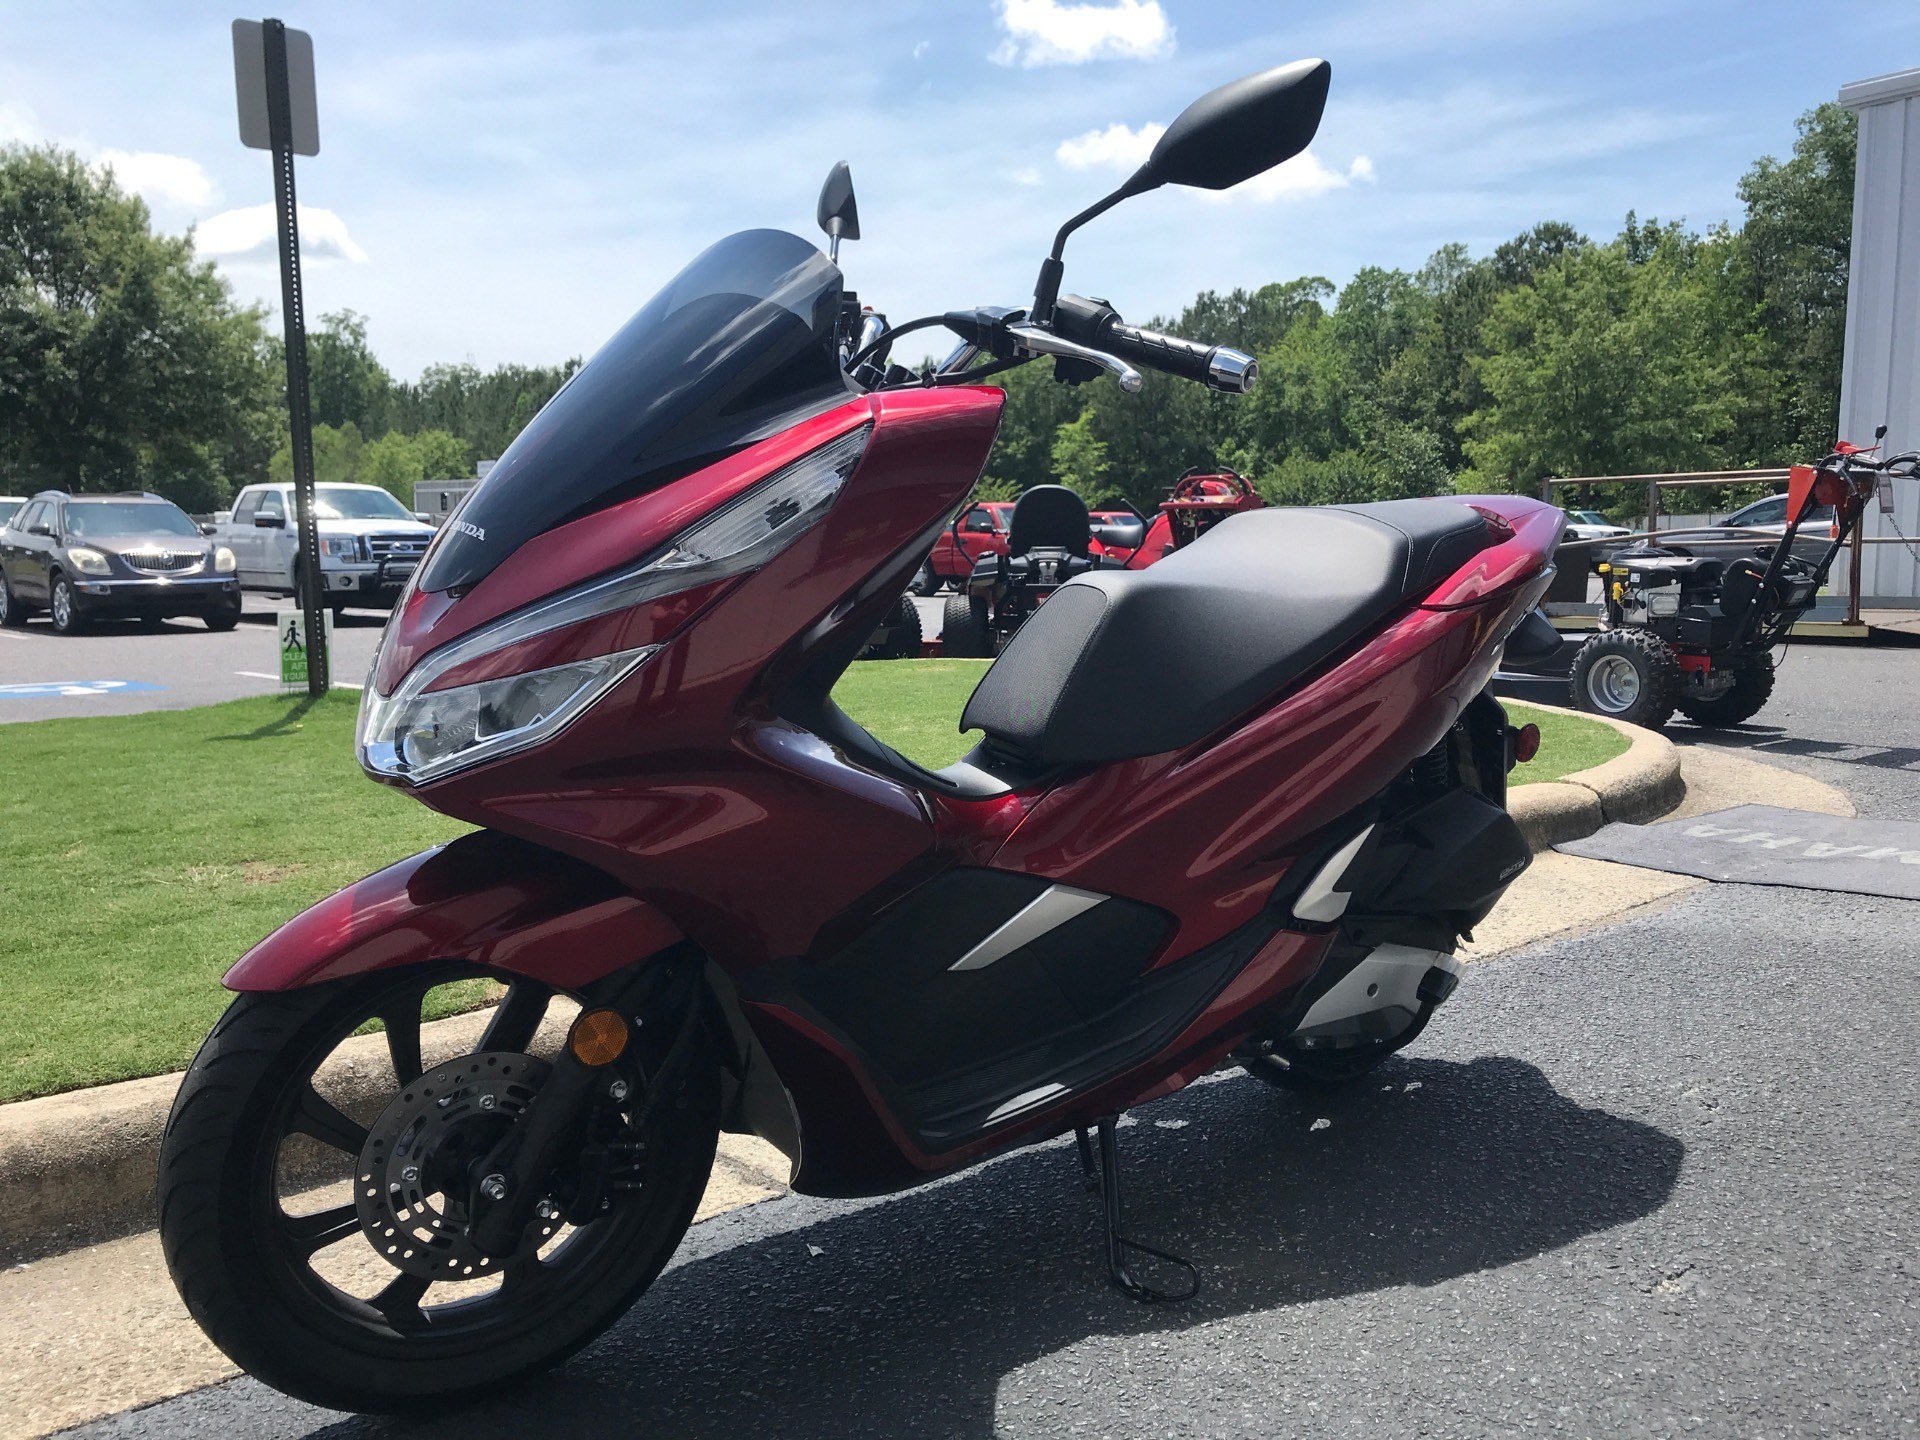 New 2020 Honda Pcx150 Scooters In Greenville Nc Stock Number N A